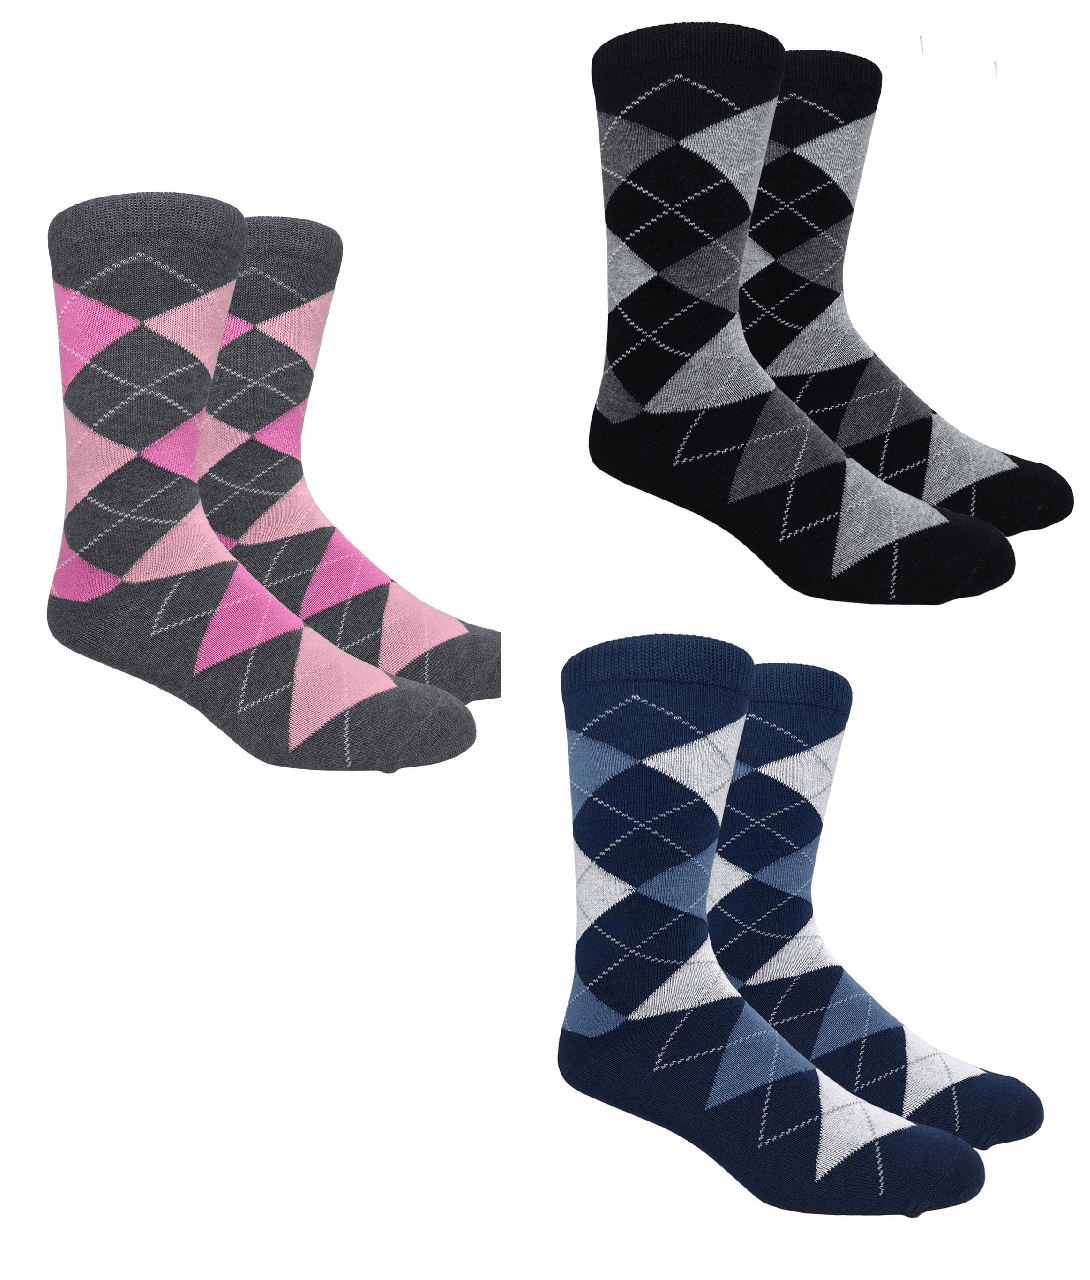 3 X Pairs Mens Assorted Argyle Comfort Cotton Dress Socks in Big Foot Size 11-14 